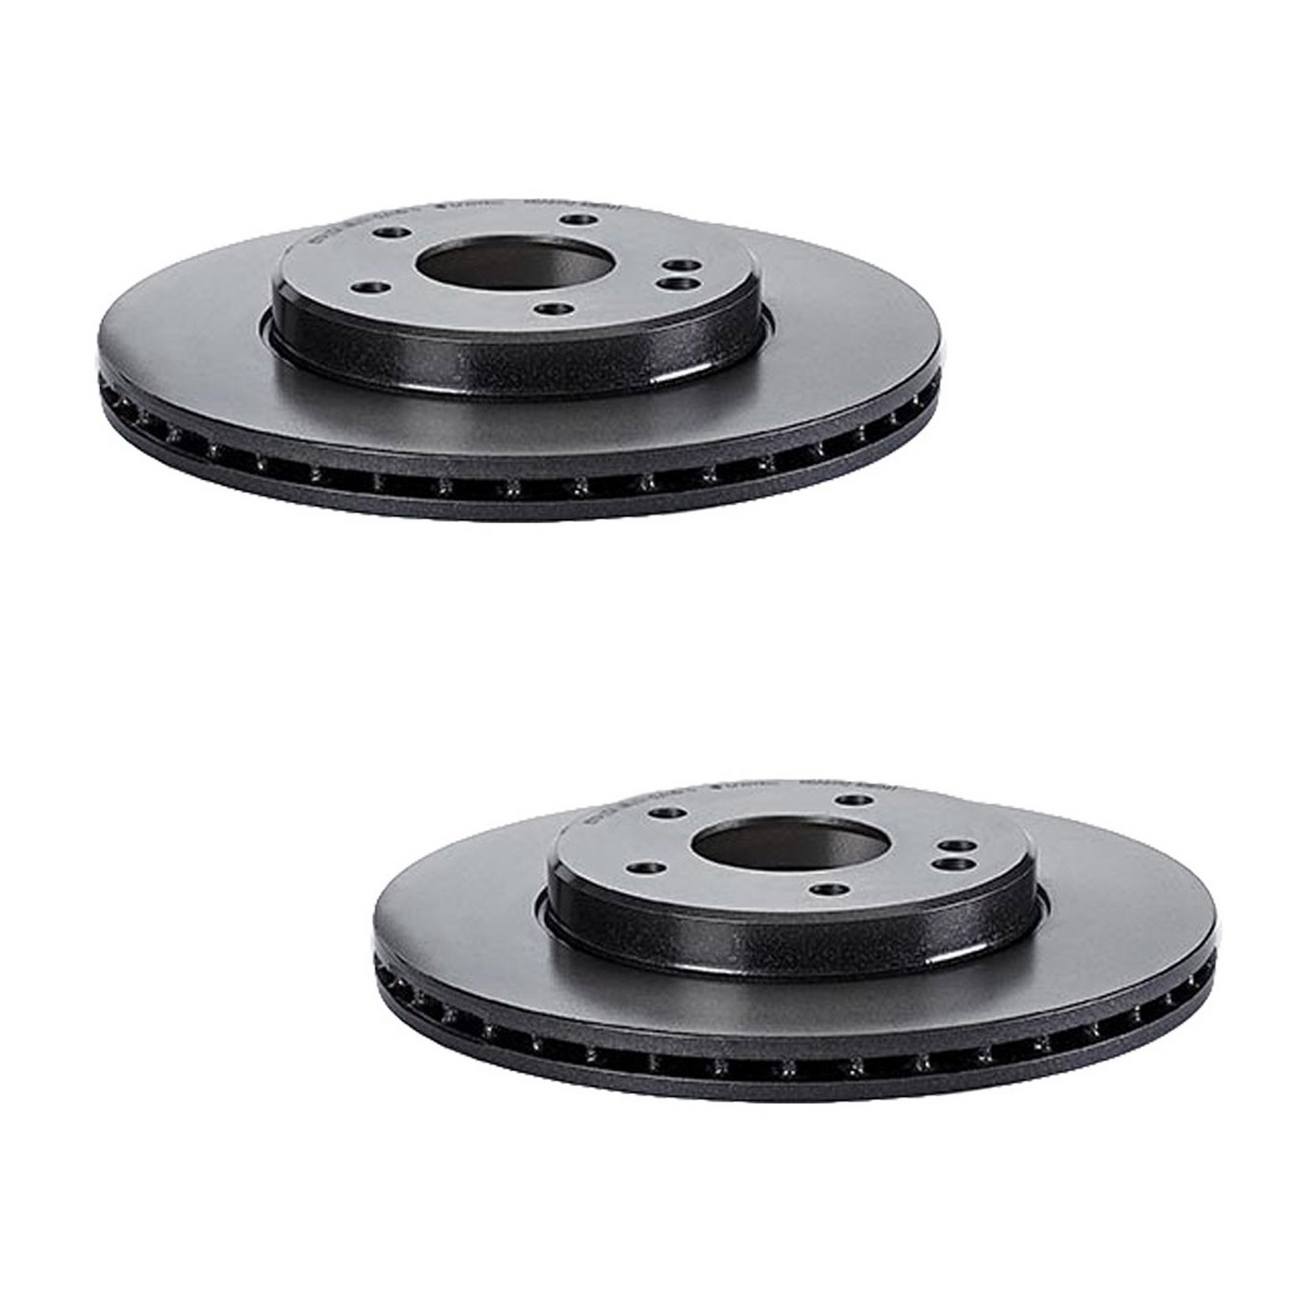 Mercedes Brakes Kit - Pads & Rotors Front and Rear (248mm/258mm) (Ceramic) 202423001264 - Brembo 1597998KIT